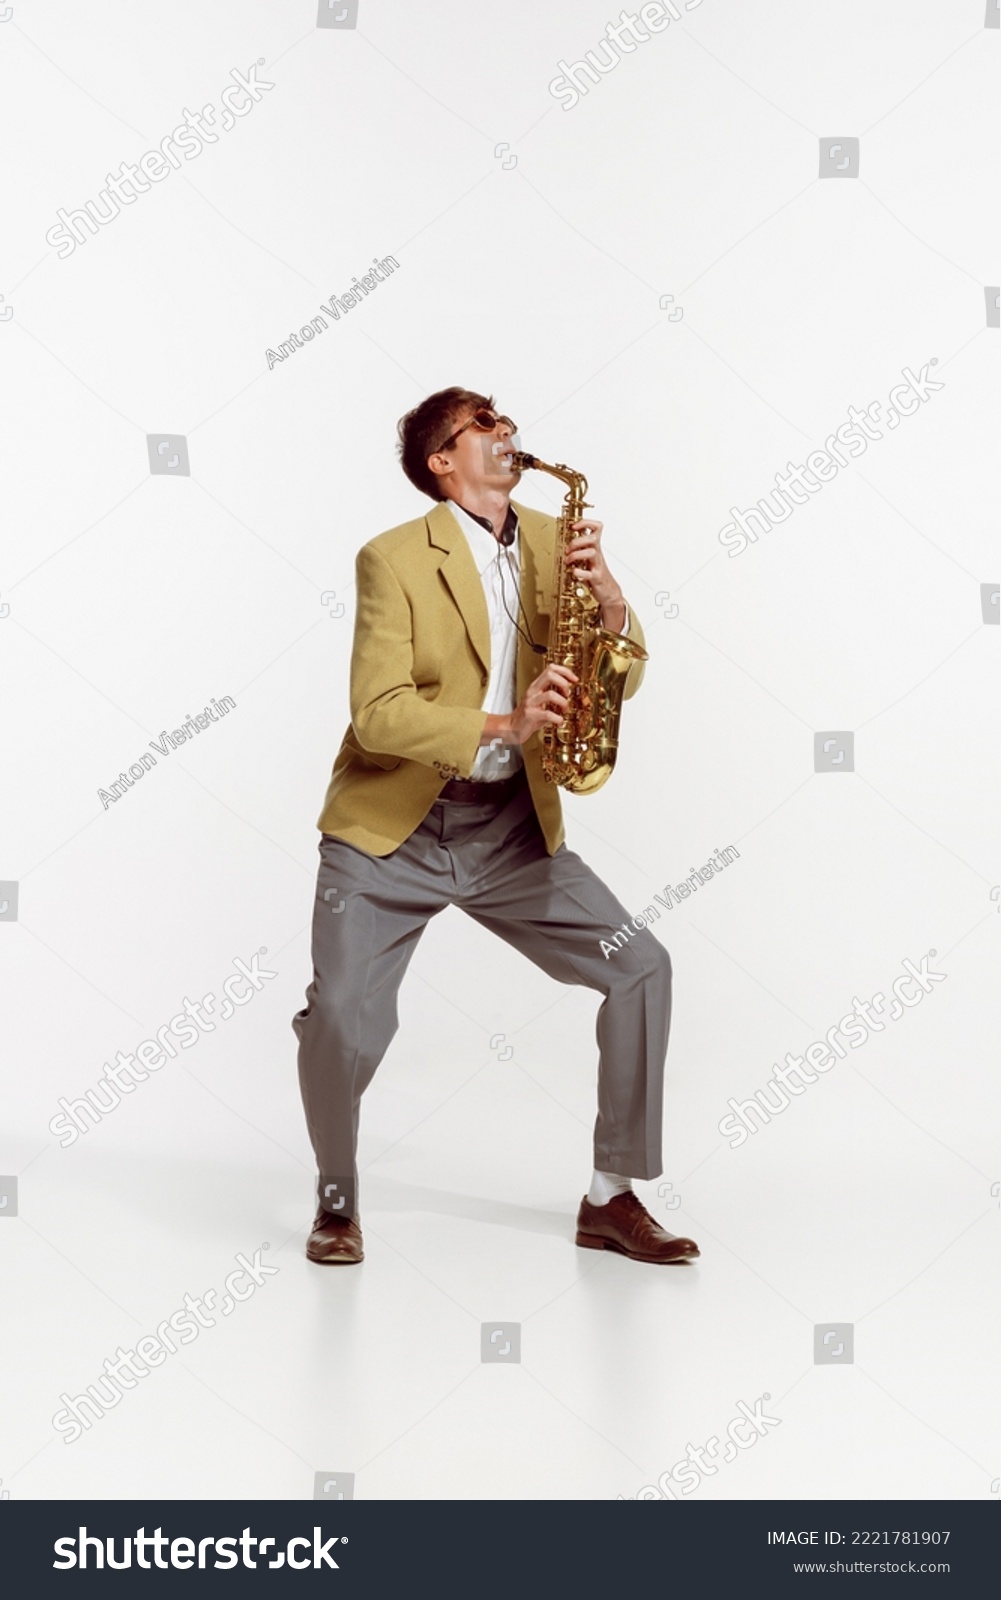 Portrait of young man in stylish yellow jacket playing saxophone isolated over white background. Jazz performer. Concept of live music, performance, retro style, creativity, artistic lifestyle #2221781907